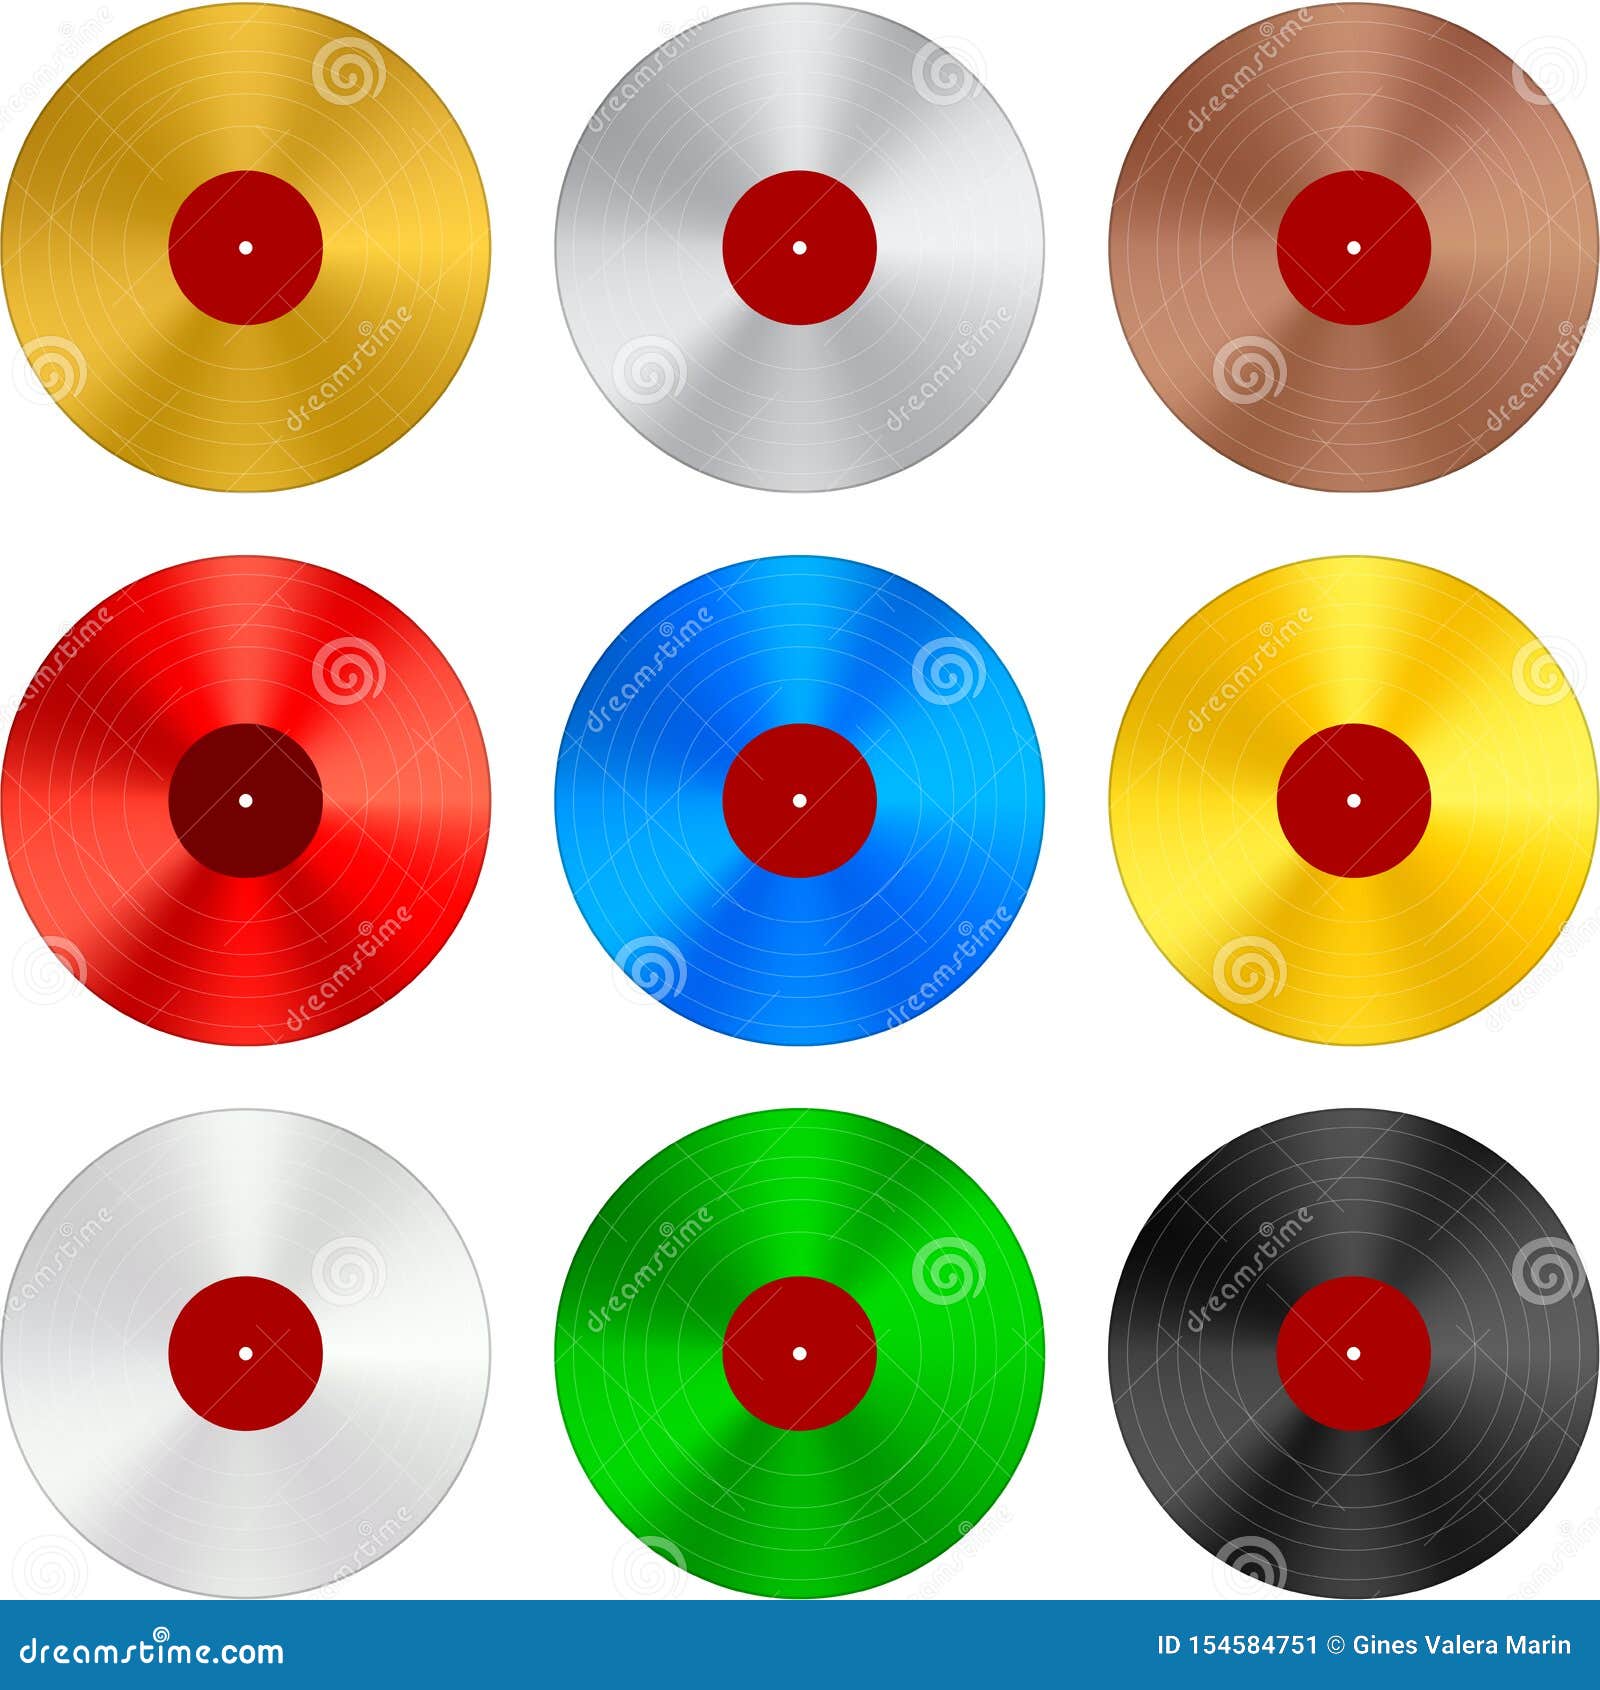 Vinyl Record in Several Colors Isolated on White Background. Stock ...